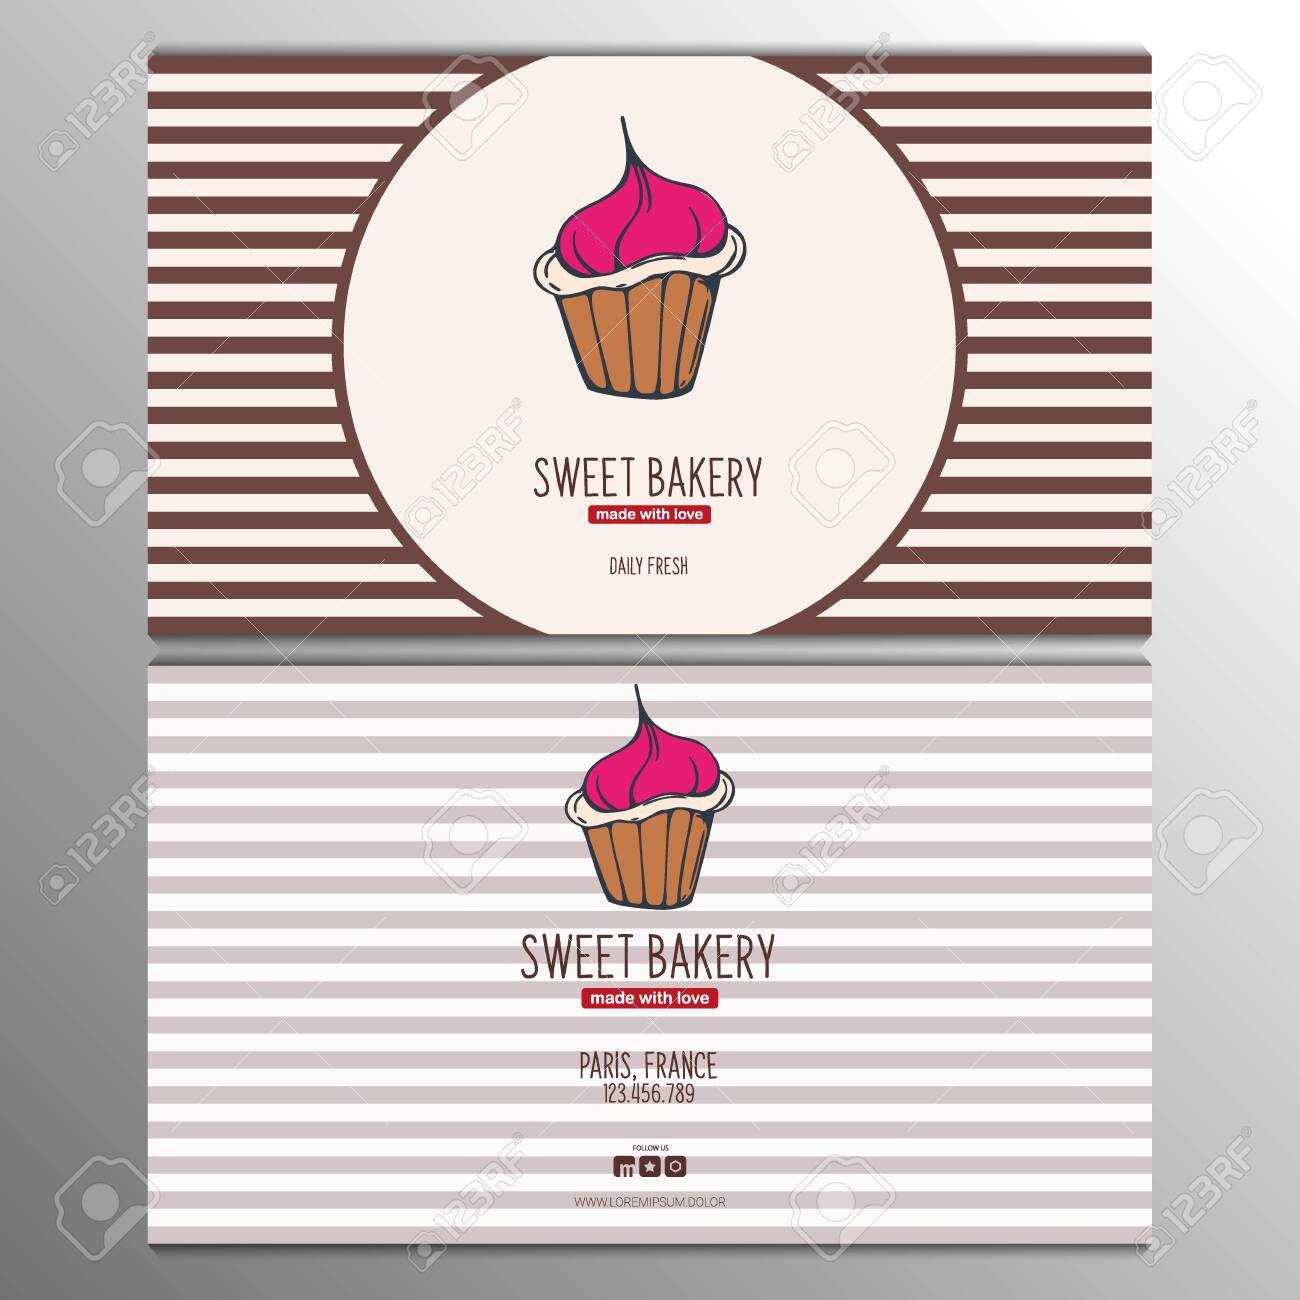 Cupcake Or Cake Business Card Template For Bakery Or Pastry. Pertaining To Cake Business Cards Templates Free